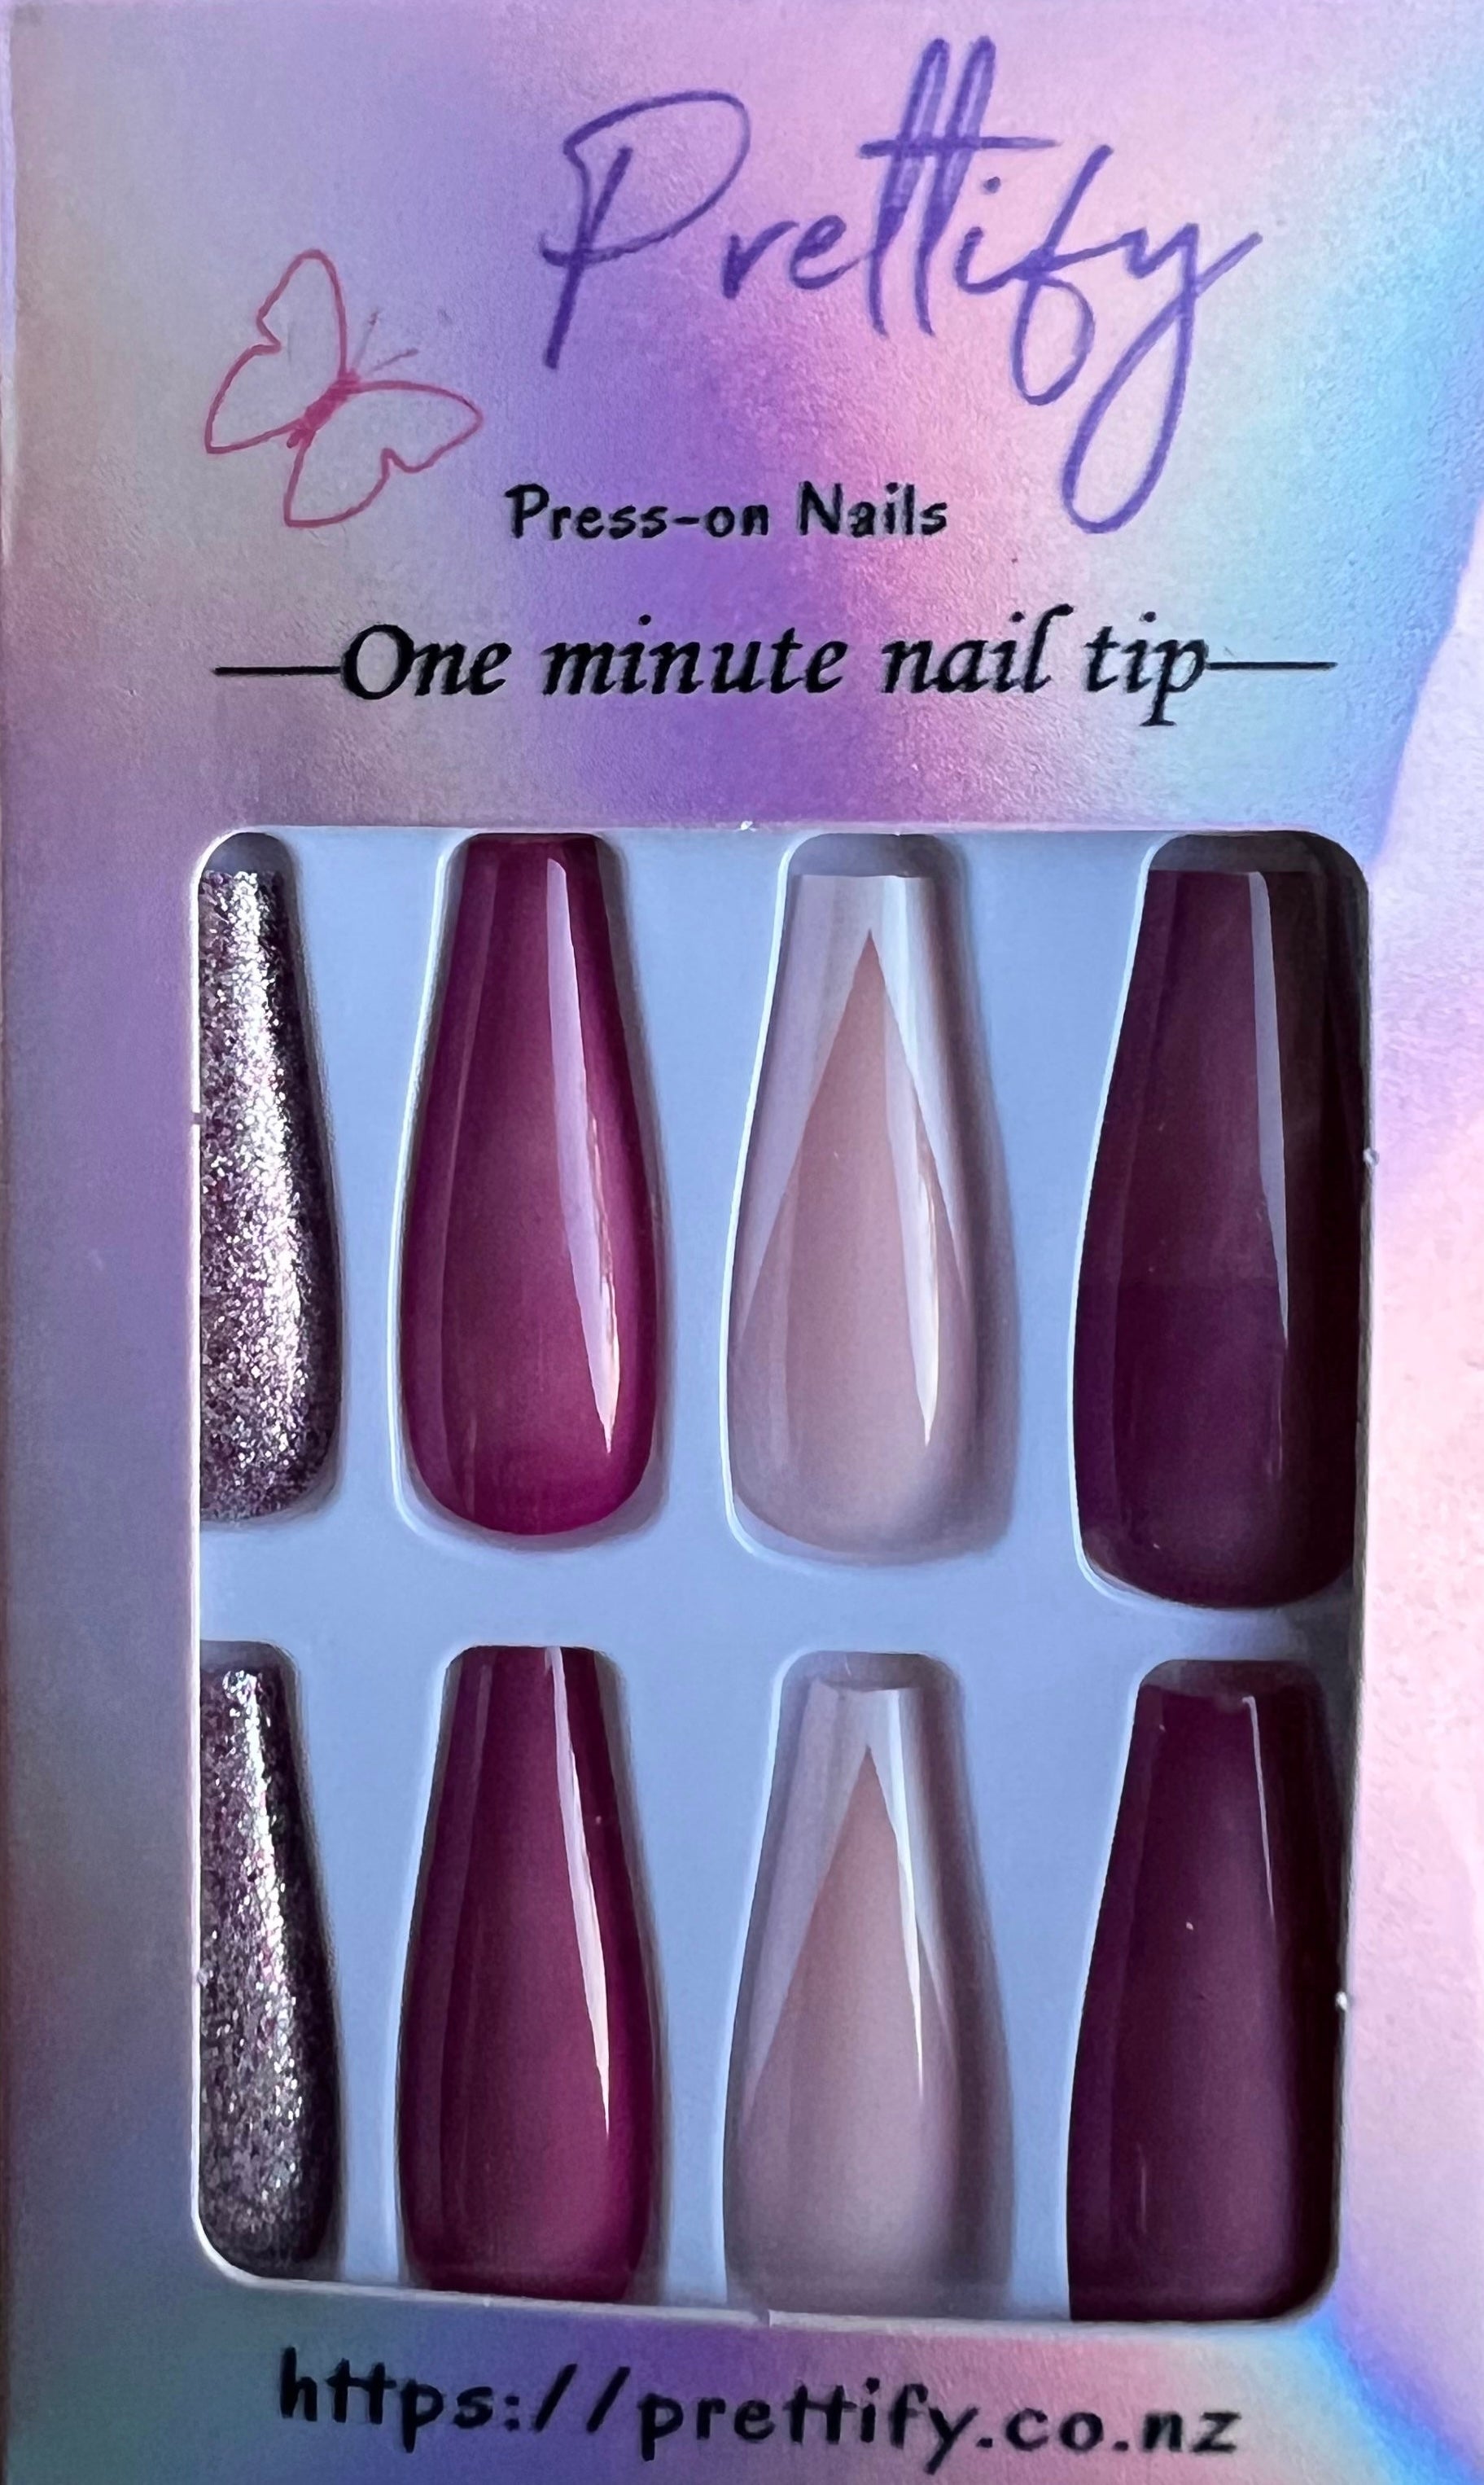 Long Coffin Press on Nails. Cherry & Glitter. Durable Acrylic Press on Nails. Easy and quick to apply. Great for those special occasions, parties or add an edge to any outfit. Gorgeous, flattering and you can re-use them again and again.